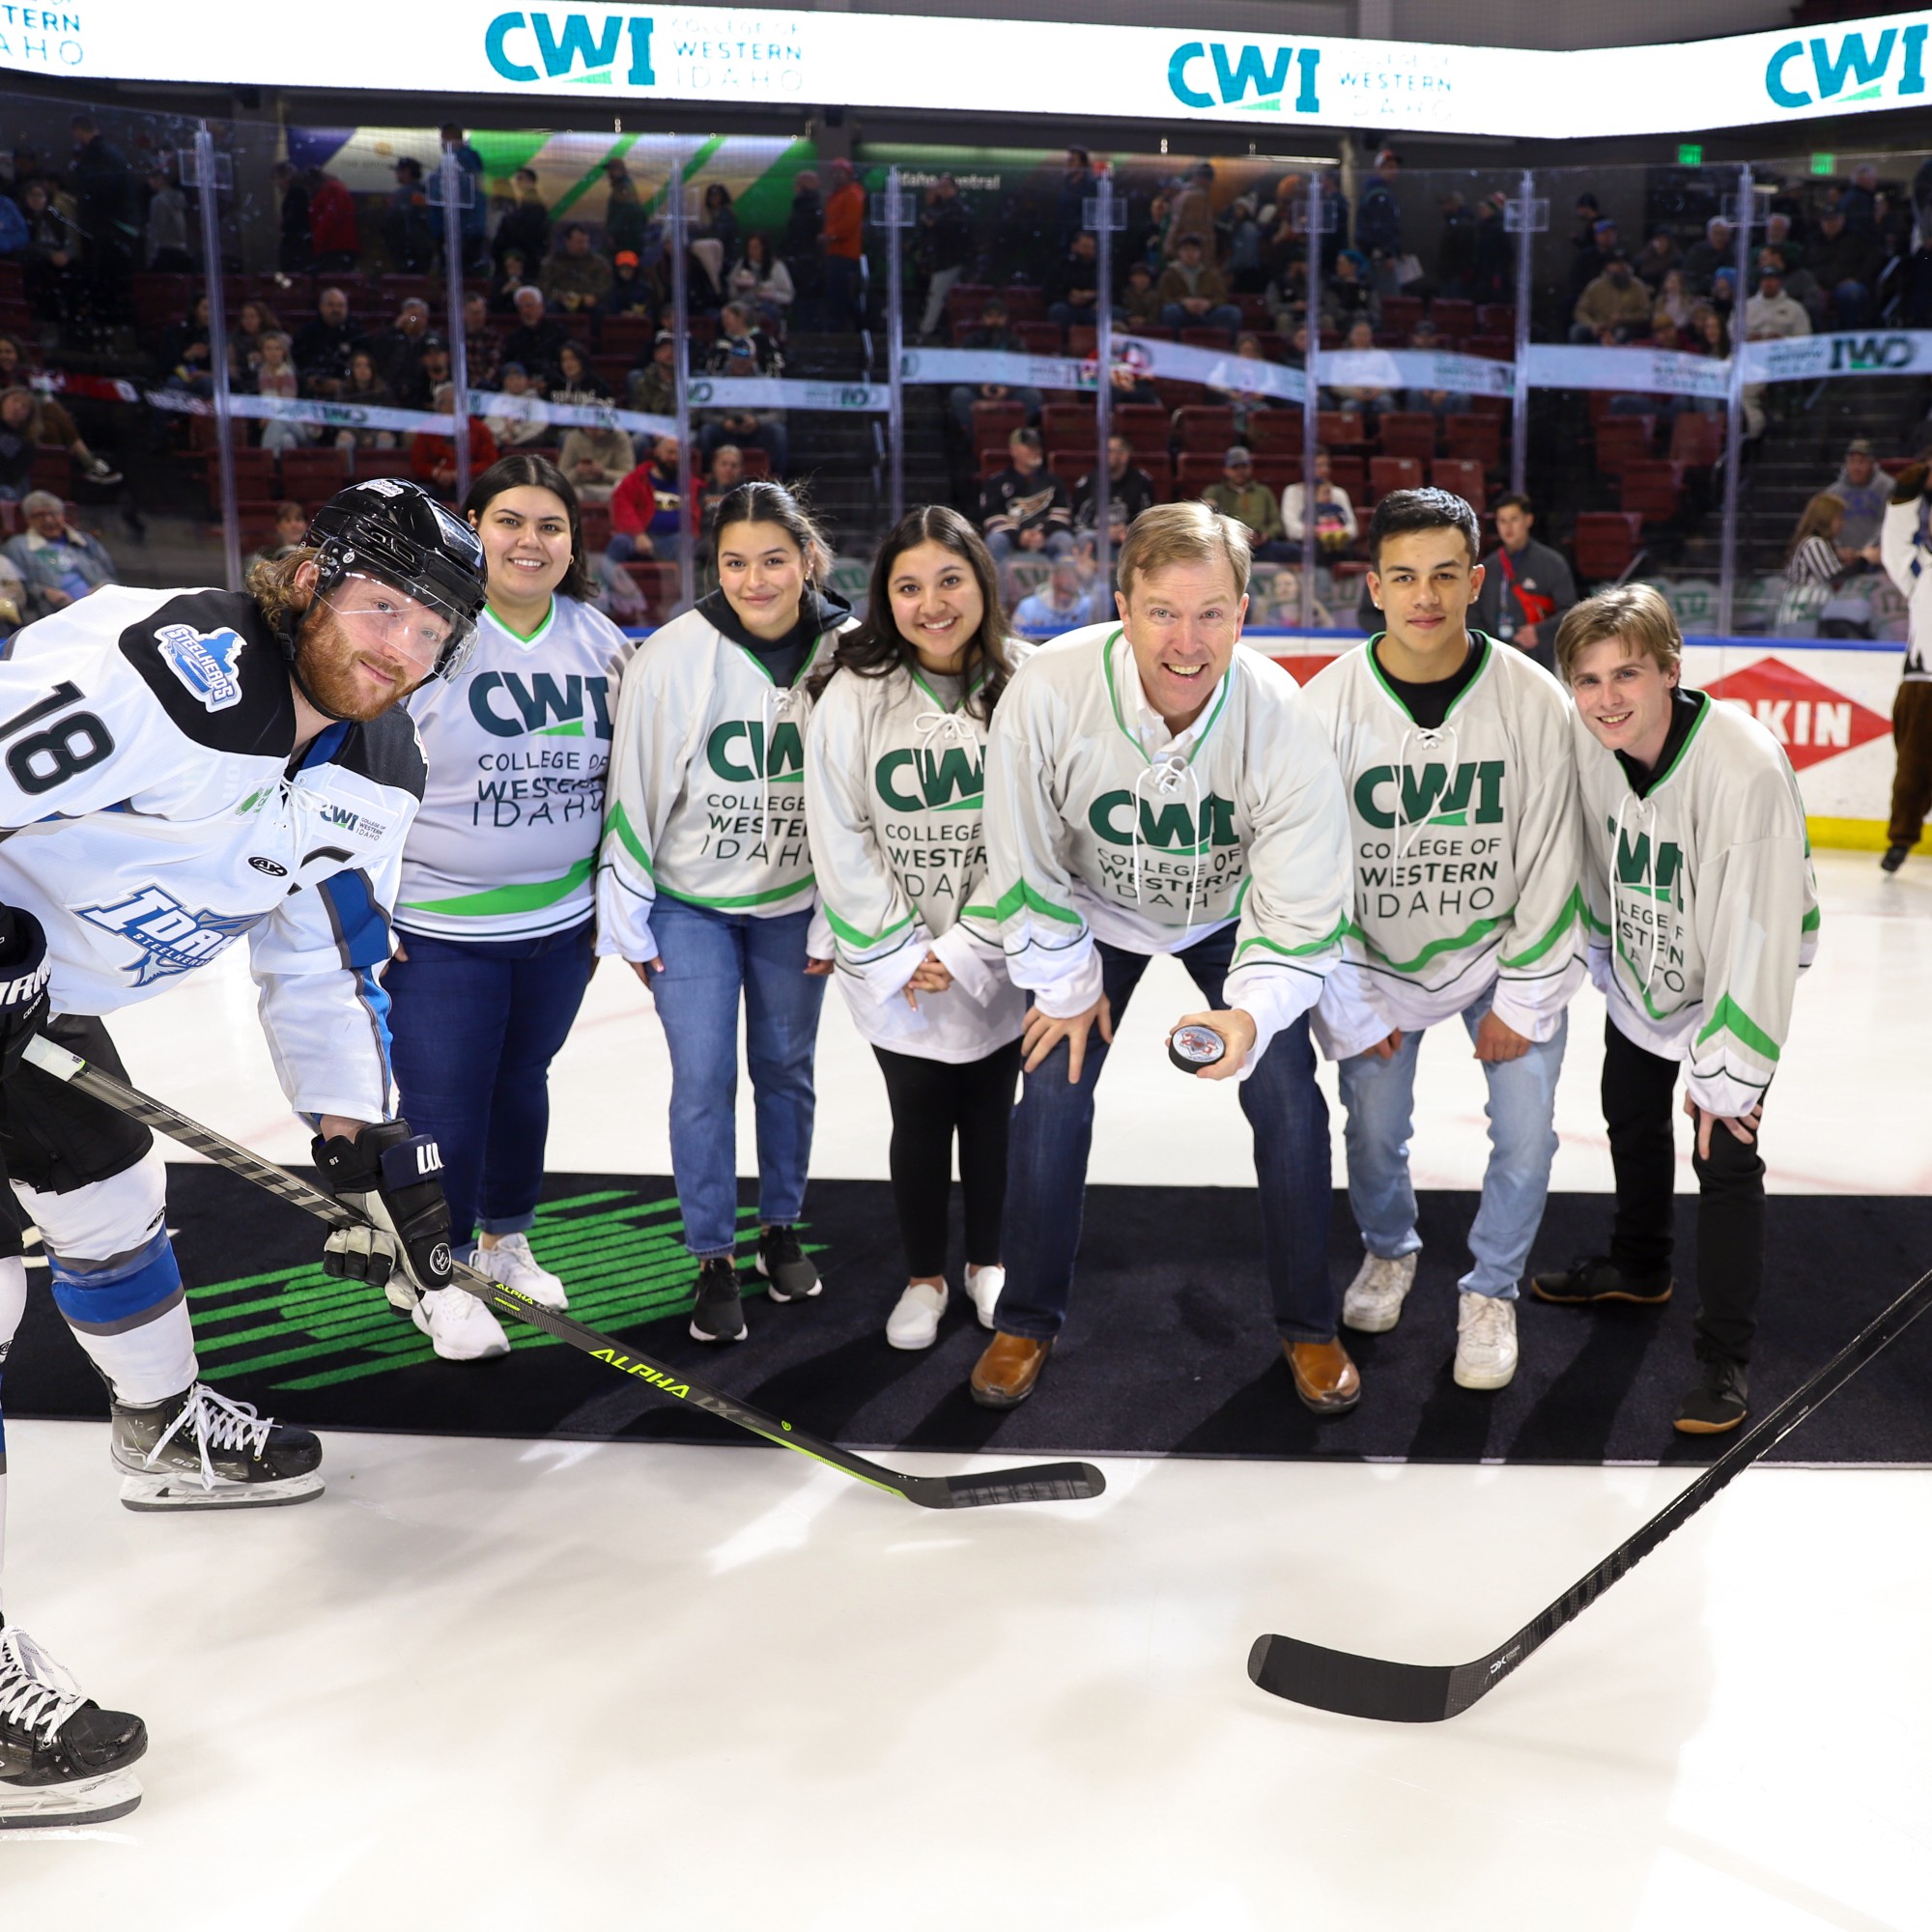 President Gordon Jones and students doing the puck drop at Steelheads game